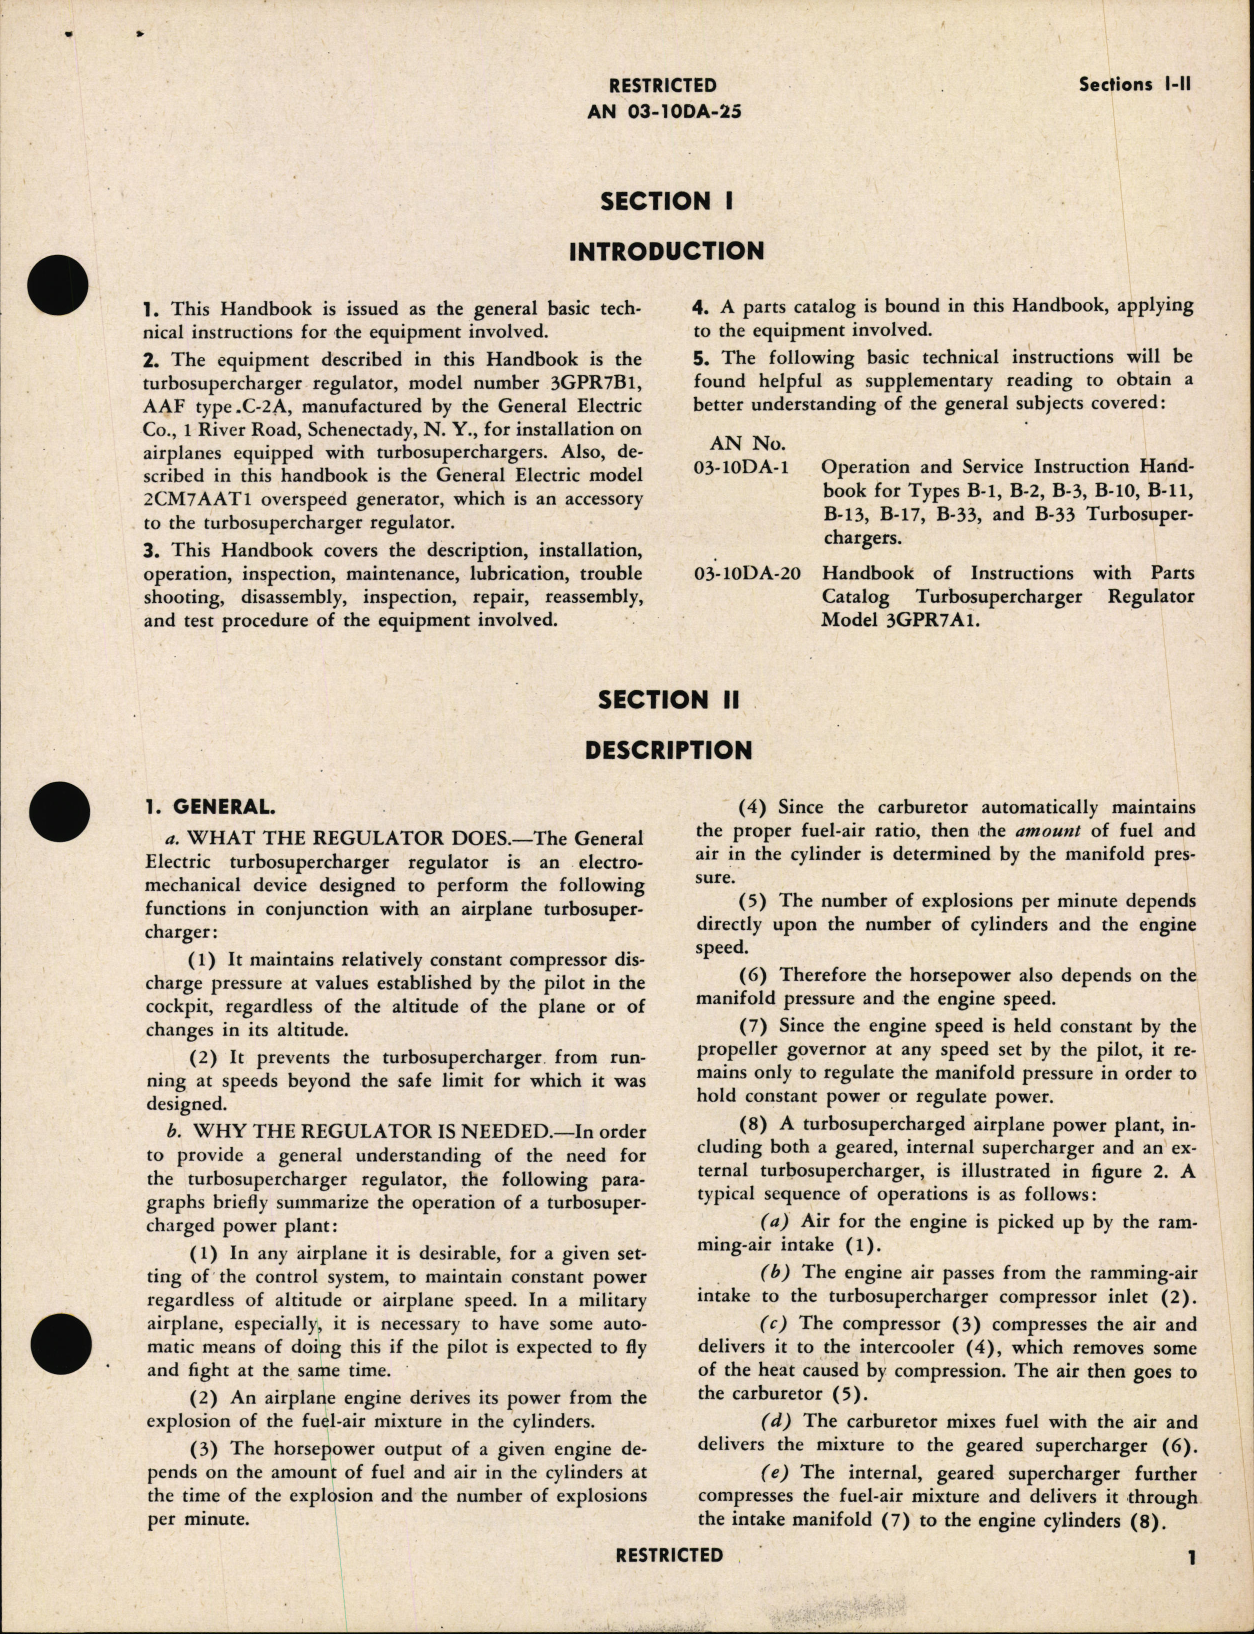 Sample page 5 from AirCorps Library document: Handbook of Instructions with Parts Catalog for Type C-2A Electric Regulator Turbosupercharger Model 3GPR7B1